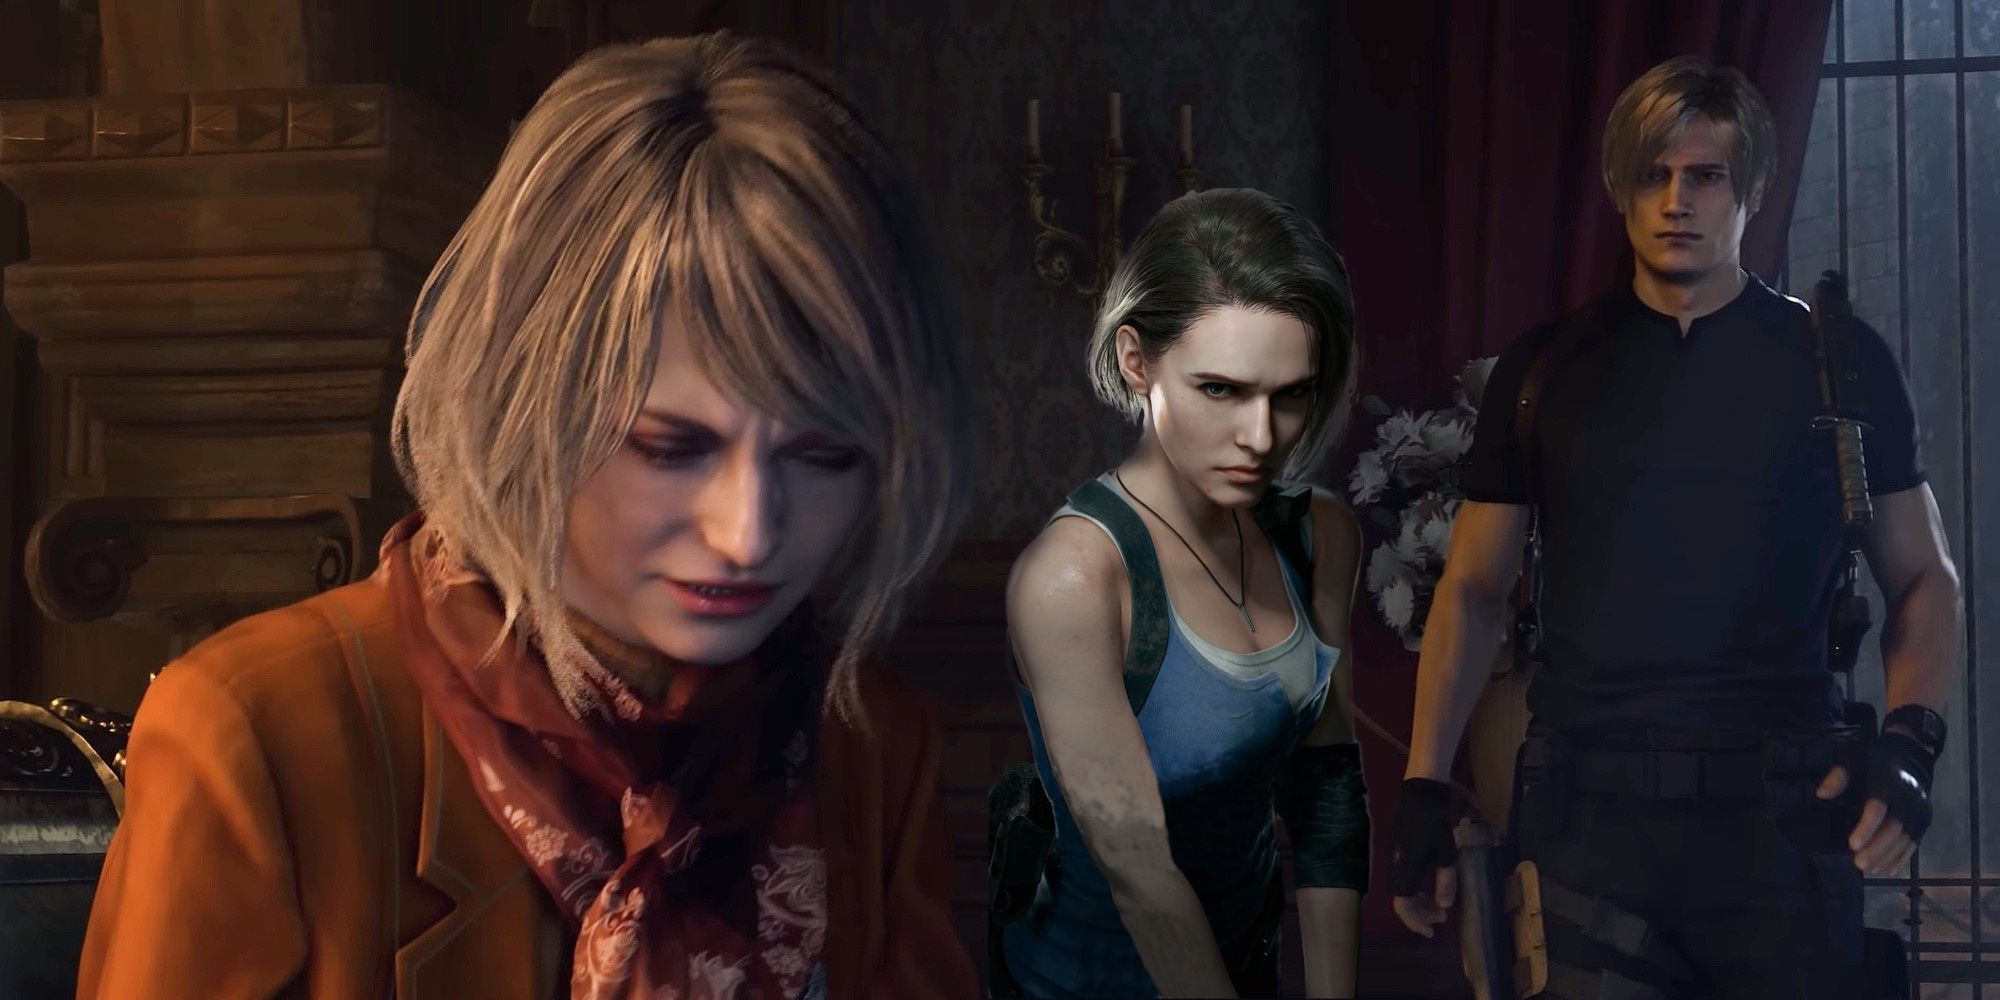 Resident Evil 4 Remake Release Time: When Will the Game be Playable?